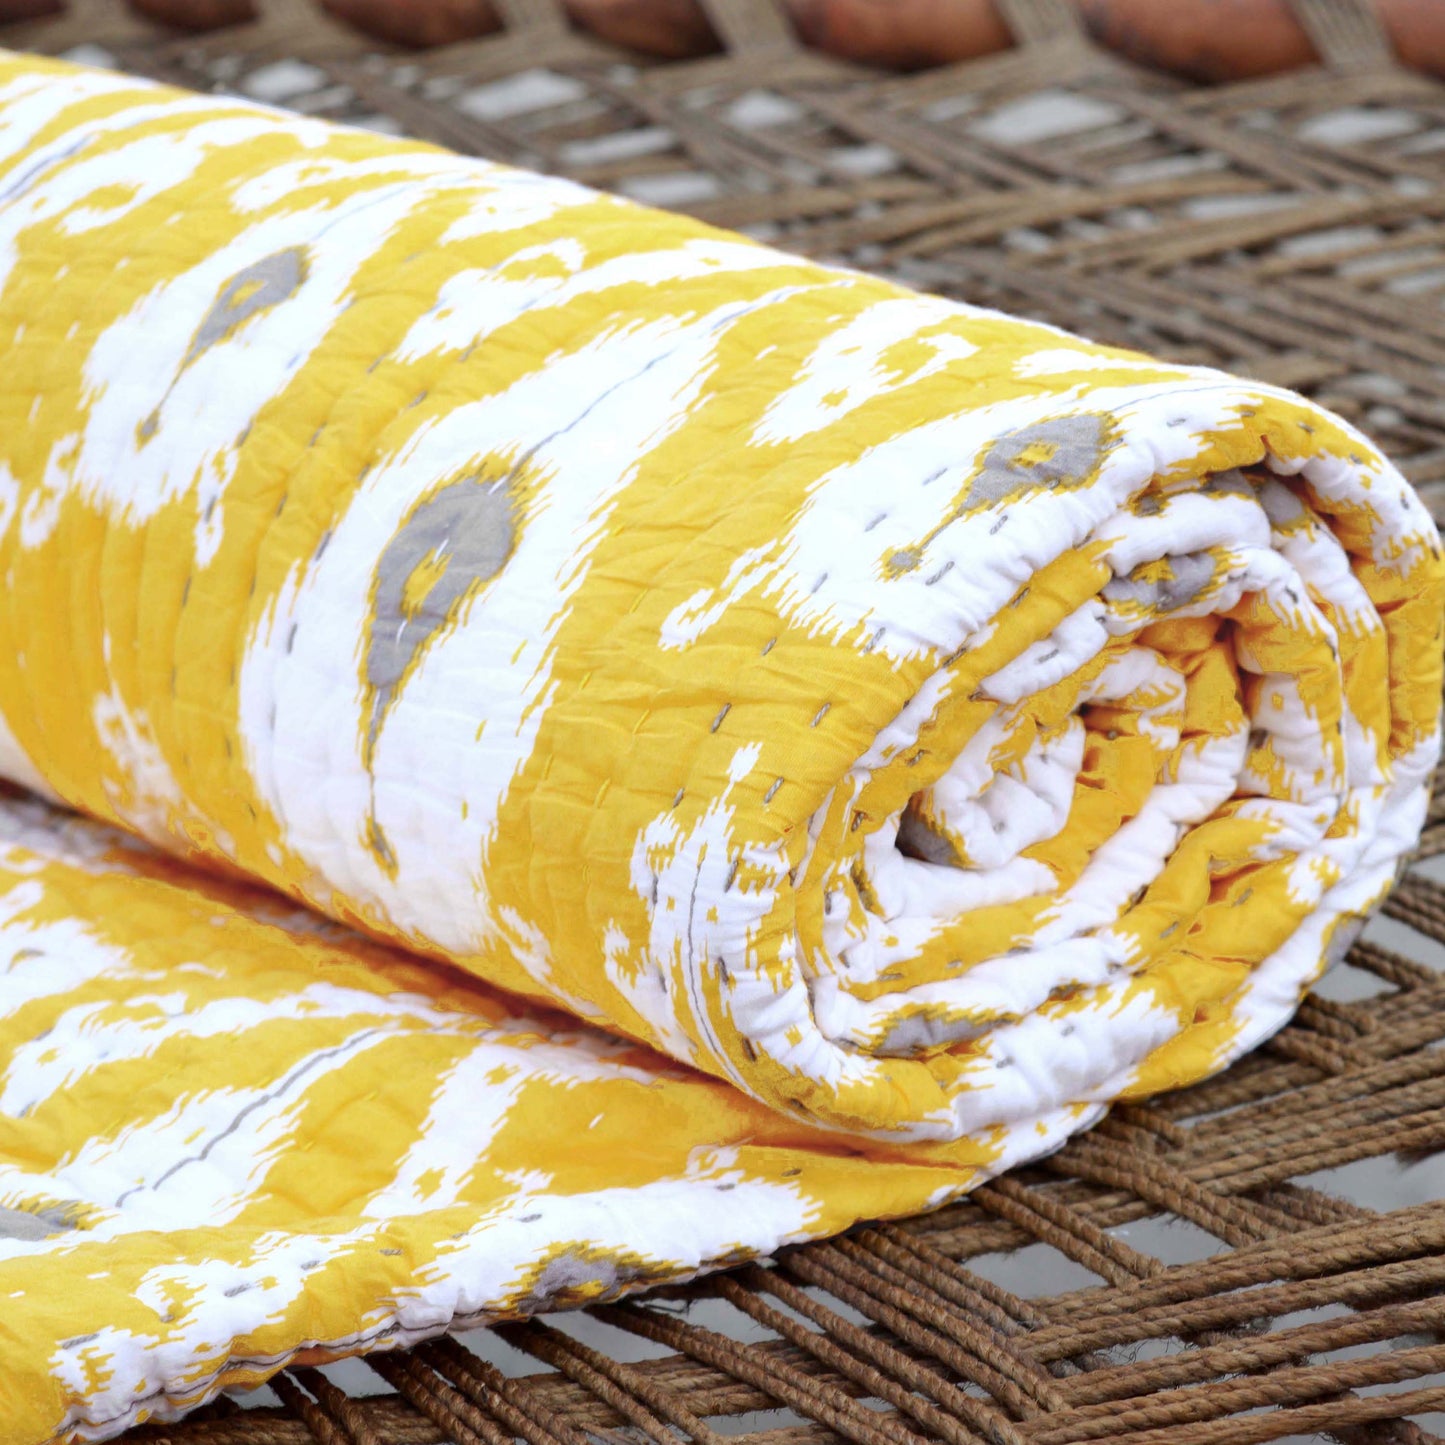 YELLOW IKAT print Kantha quilt - stripe pattern quilting - Quilt set / Quilt, Sizes available